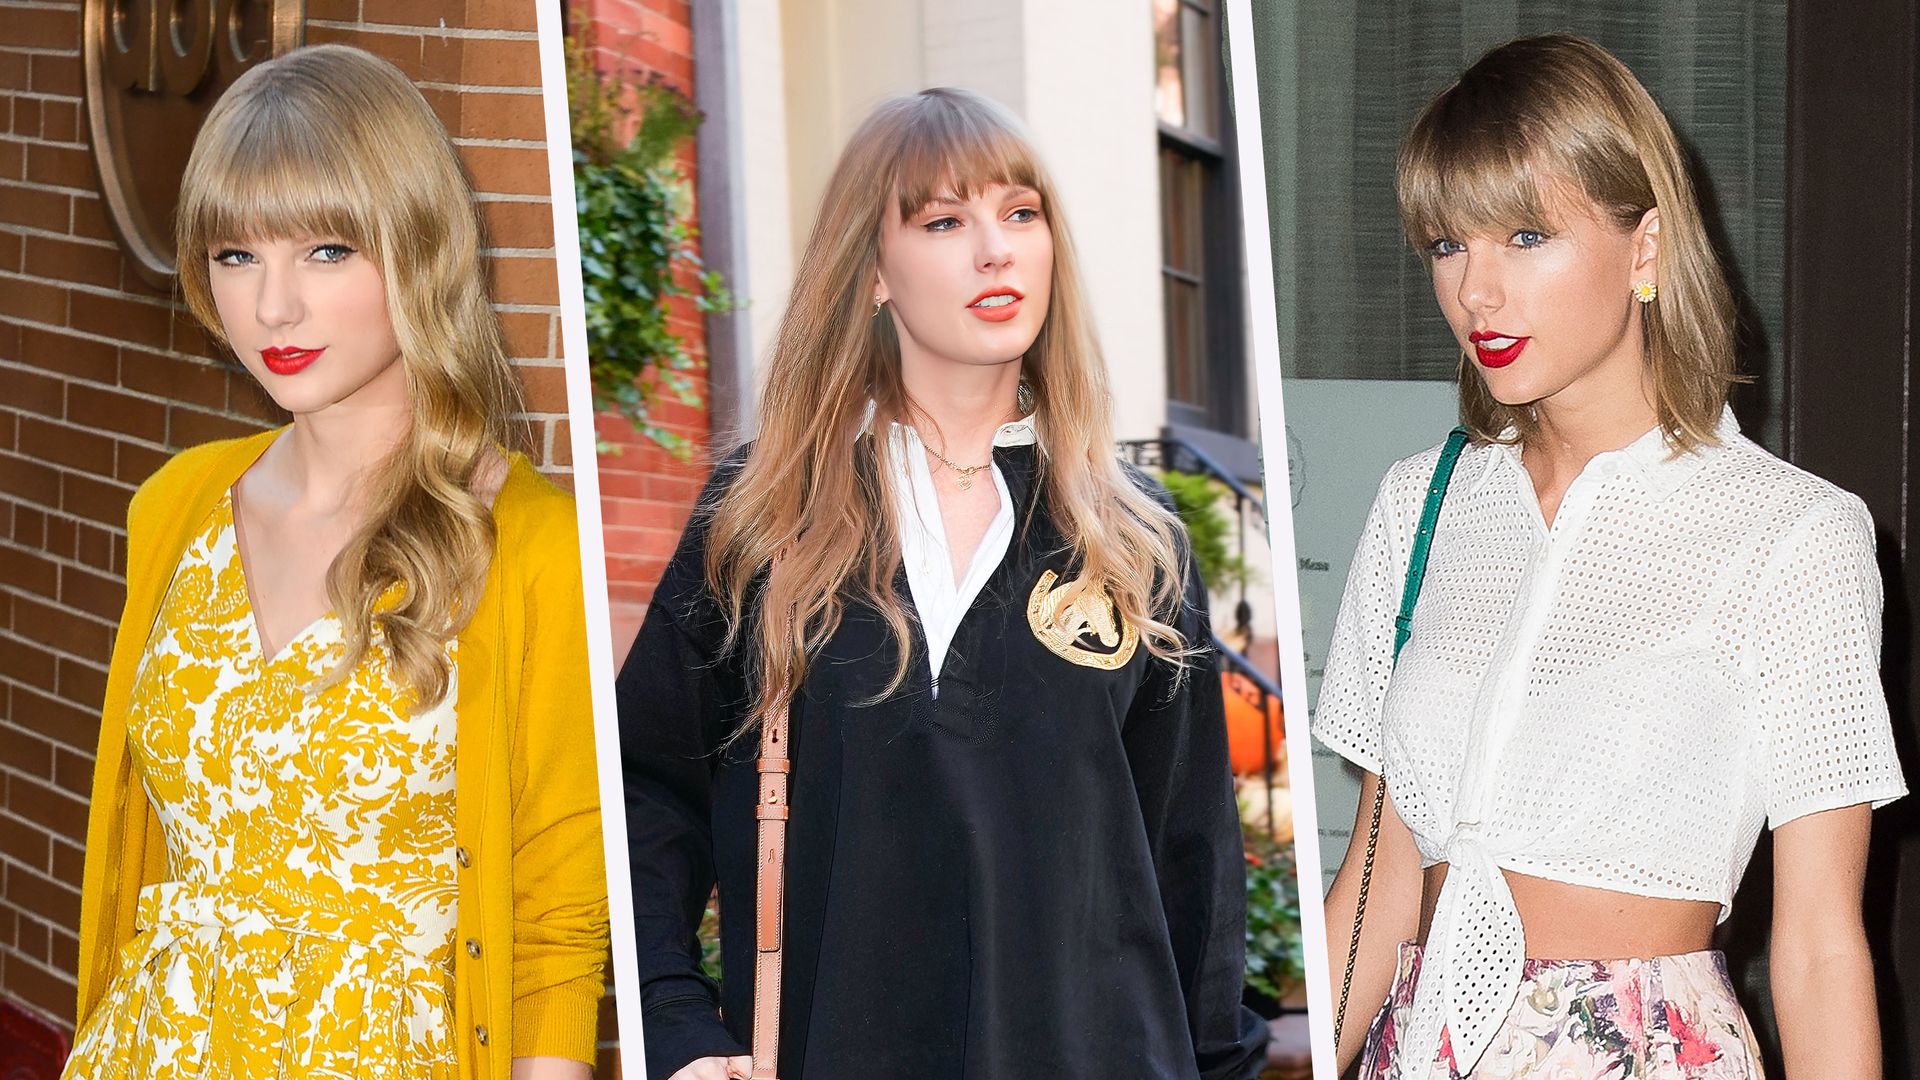 Exclusive: Inside the Instagram account making Taylor Swift's 'intentional and powerful' wardrobe available to all